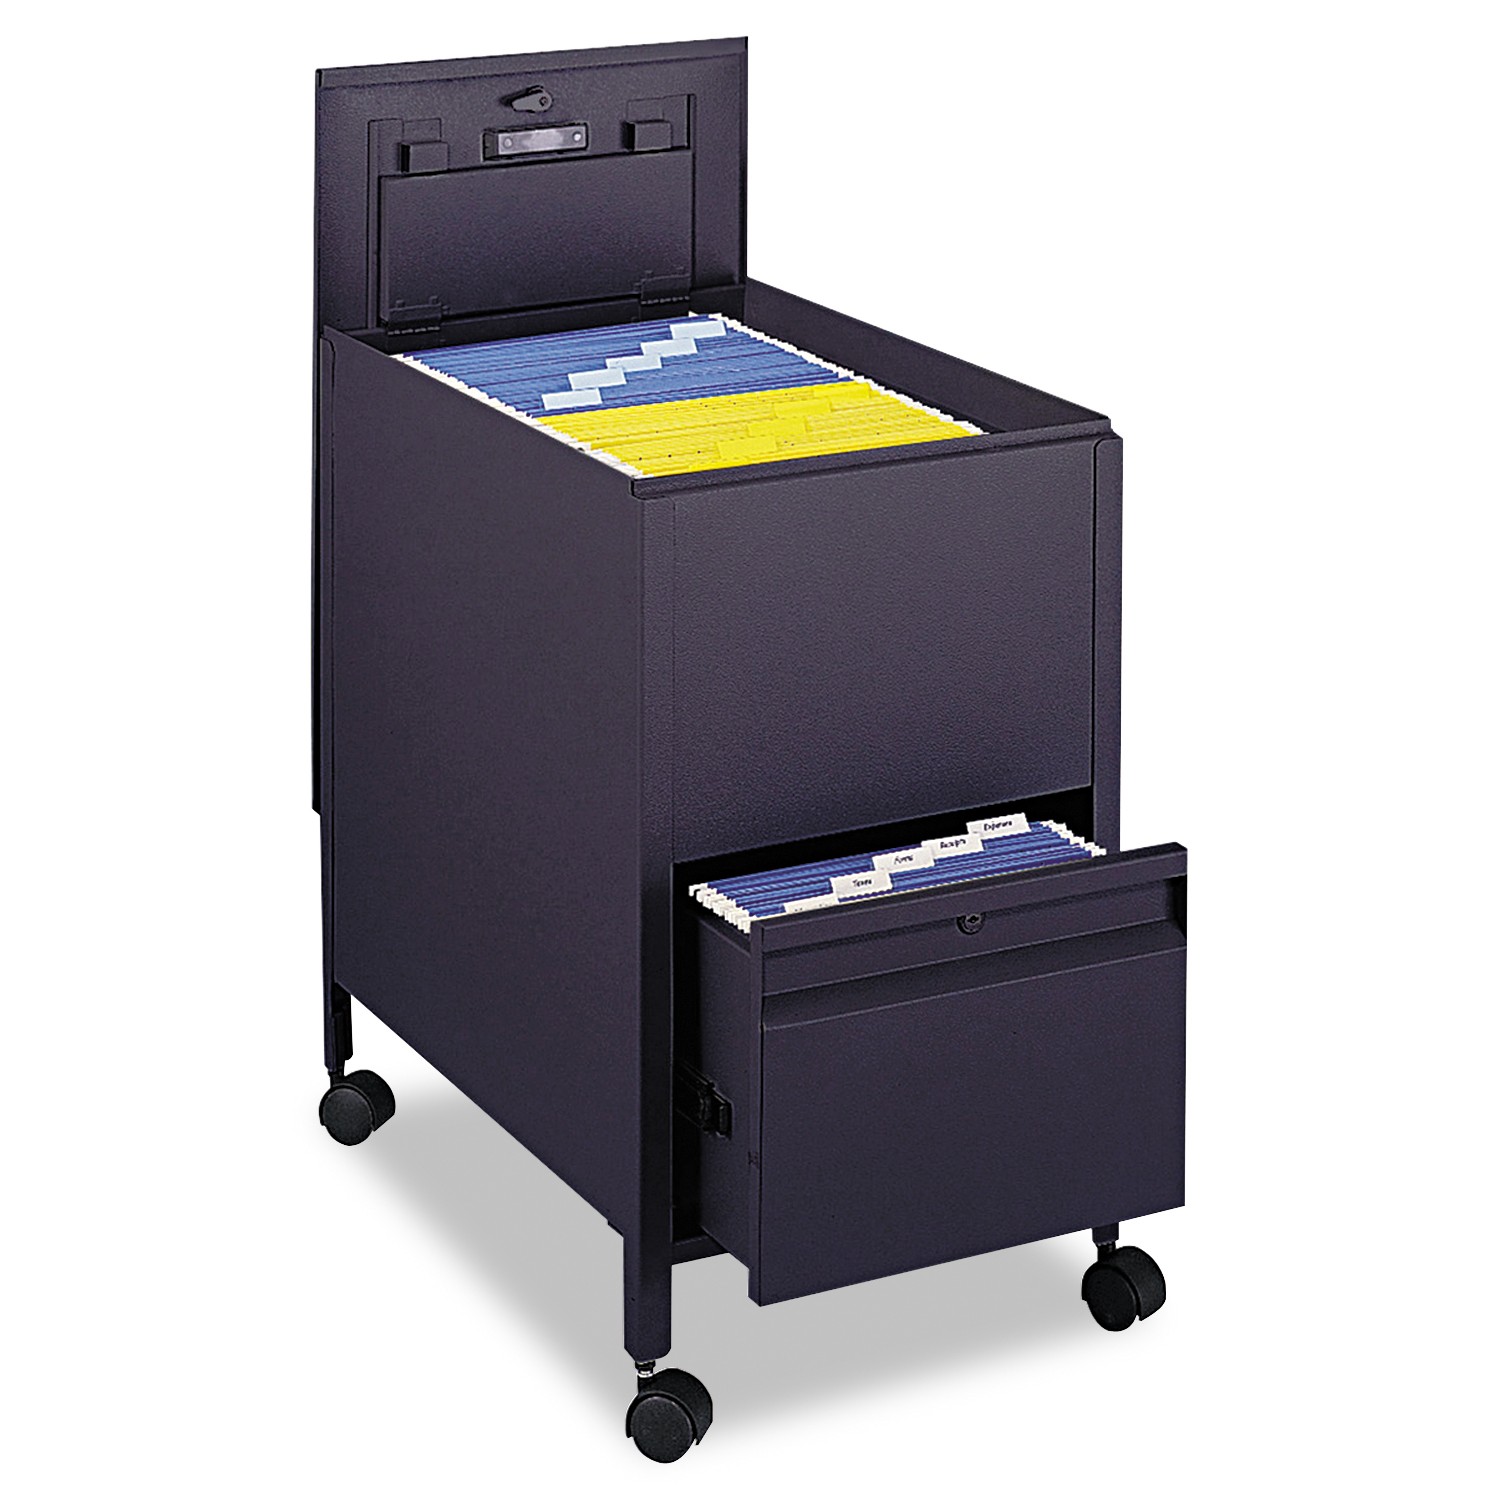 Safco Rollaway Mobile File Cart - 300 lb Capacity - 4 Casters - 2" Caster Size - Steel - x 17" Width x 26" Depth x 28" Height - 